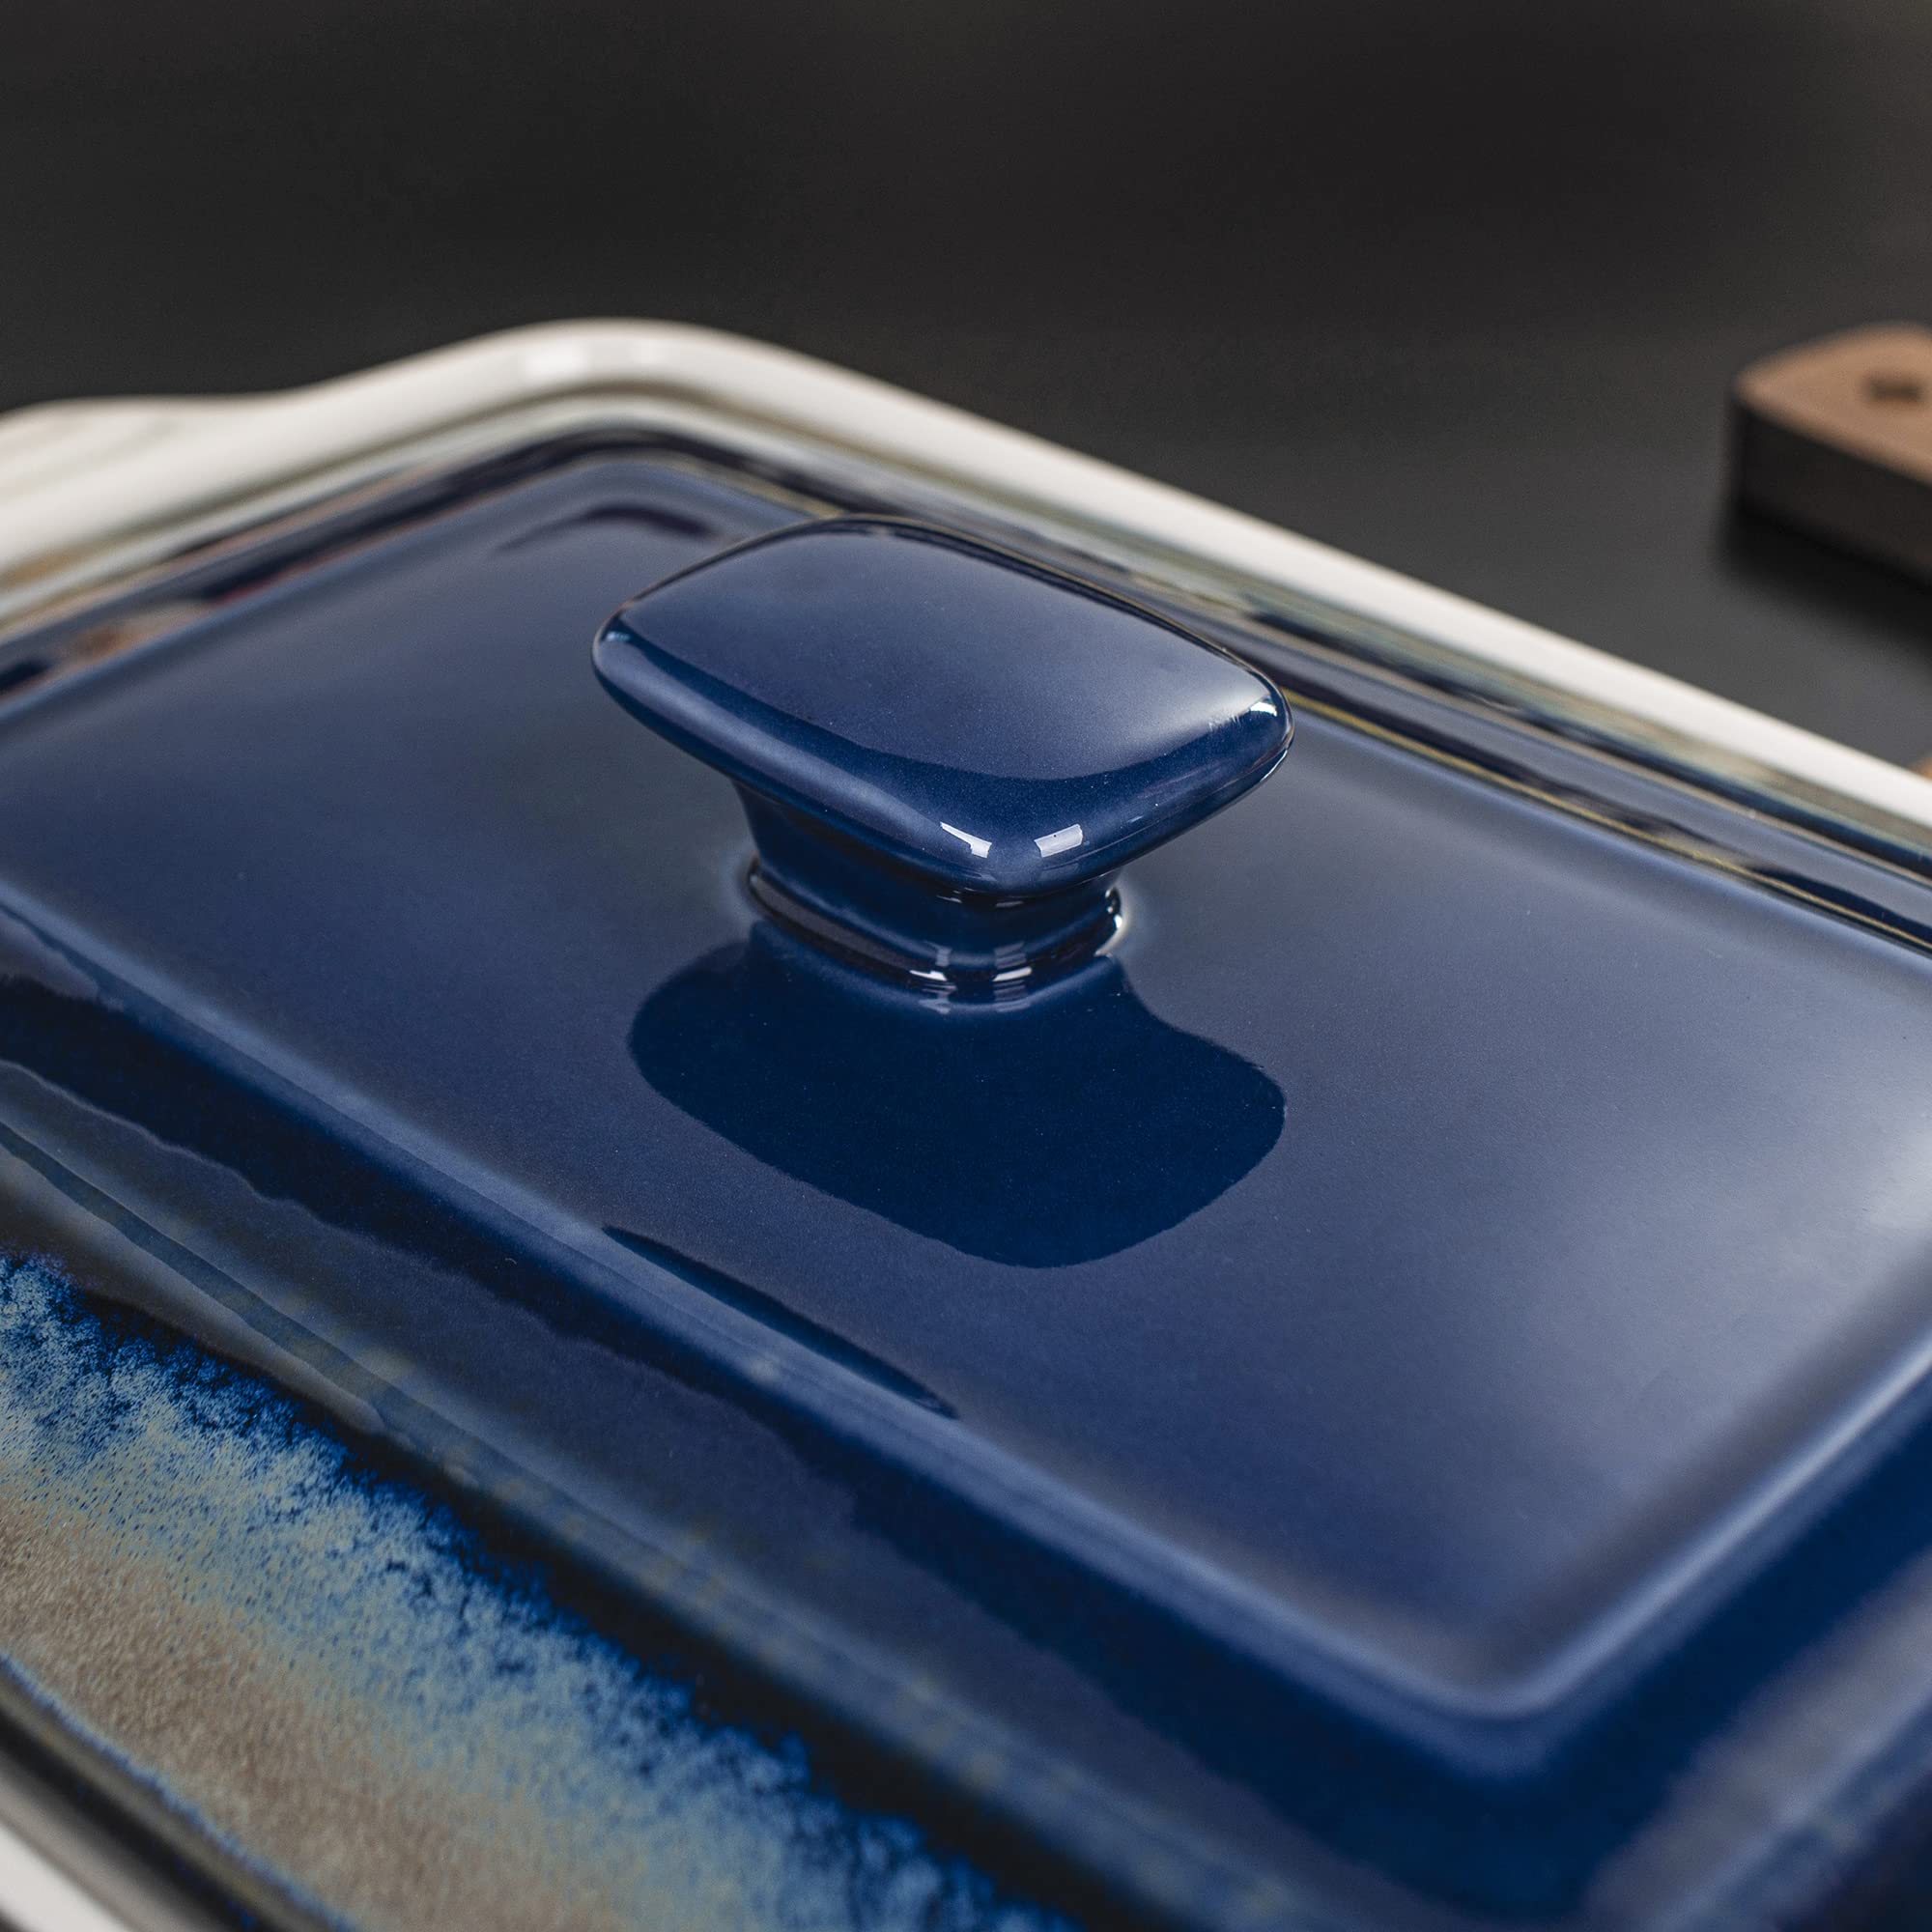 4.5 Quart Casserole Dish with Lid, LOVECASA Covered Casserole Dish Cookware, 13 x 9 Inches Nonstick Baking Dish Lasagna Pan Deep, Ceramic Bakeware for Oven, Easy to Clean, Indigo Gray Gradient